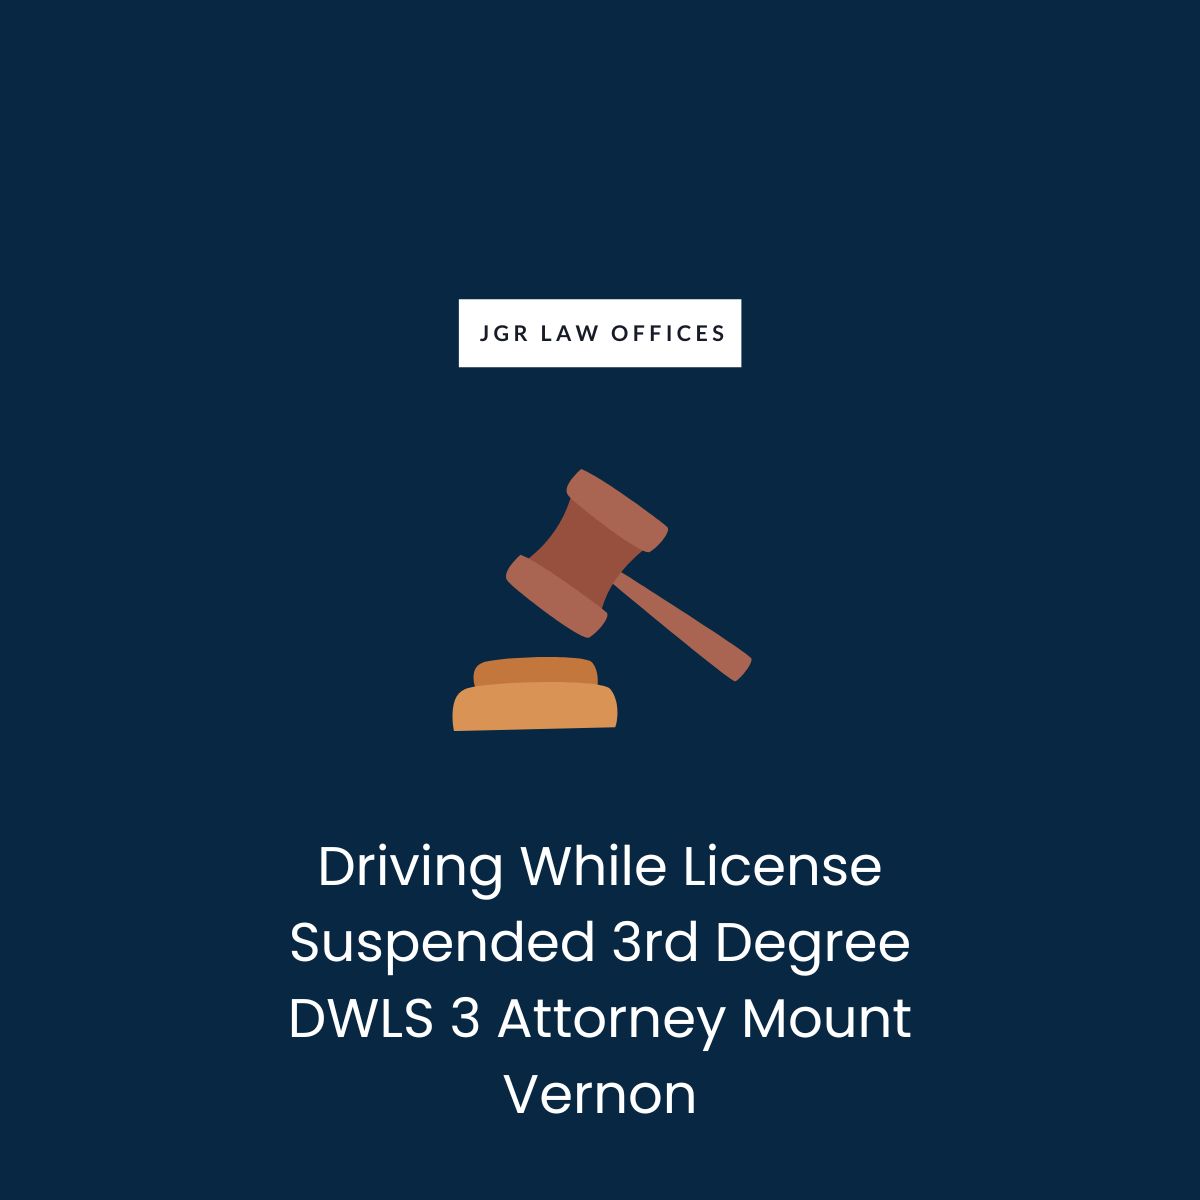 Driving While License Suspended 3rd Degree DWLS 3 Attorney Mount Vernon Driving While License Suspended 3rd Degree DWLS 3 Driving While License Suspended 3rd Degree DWLS 3